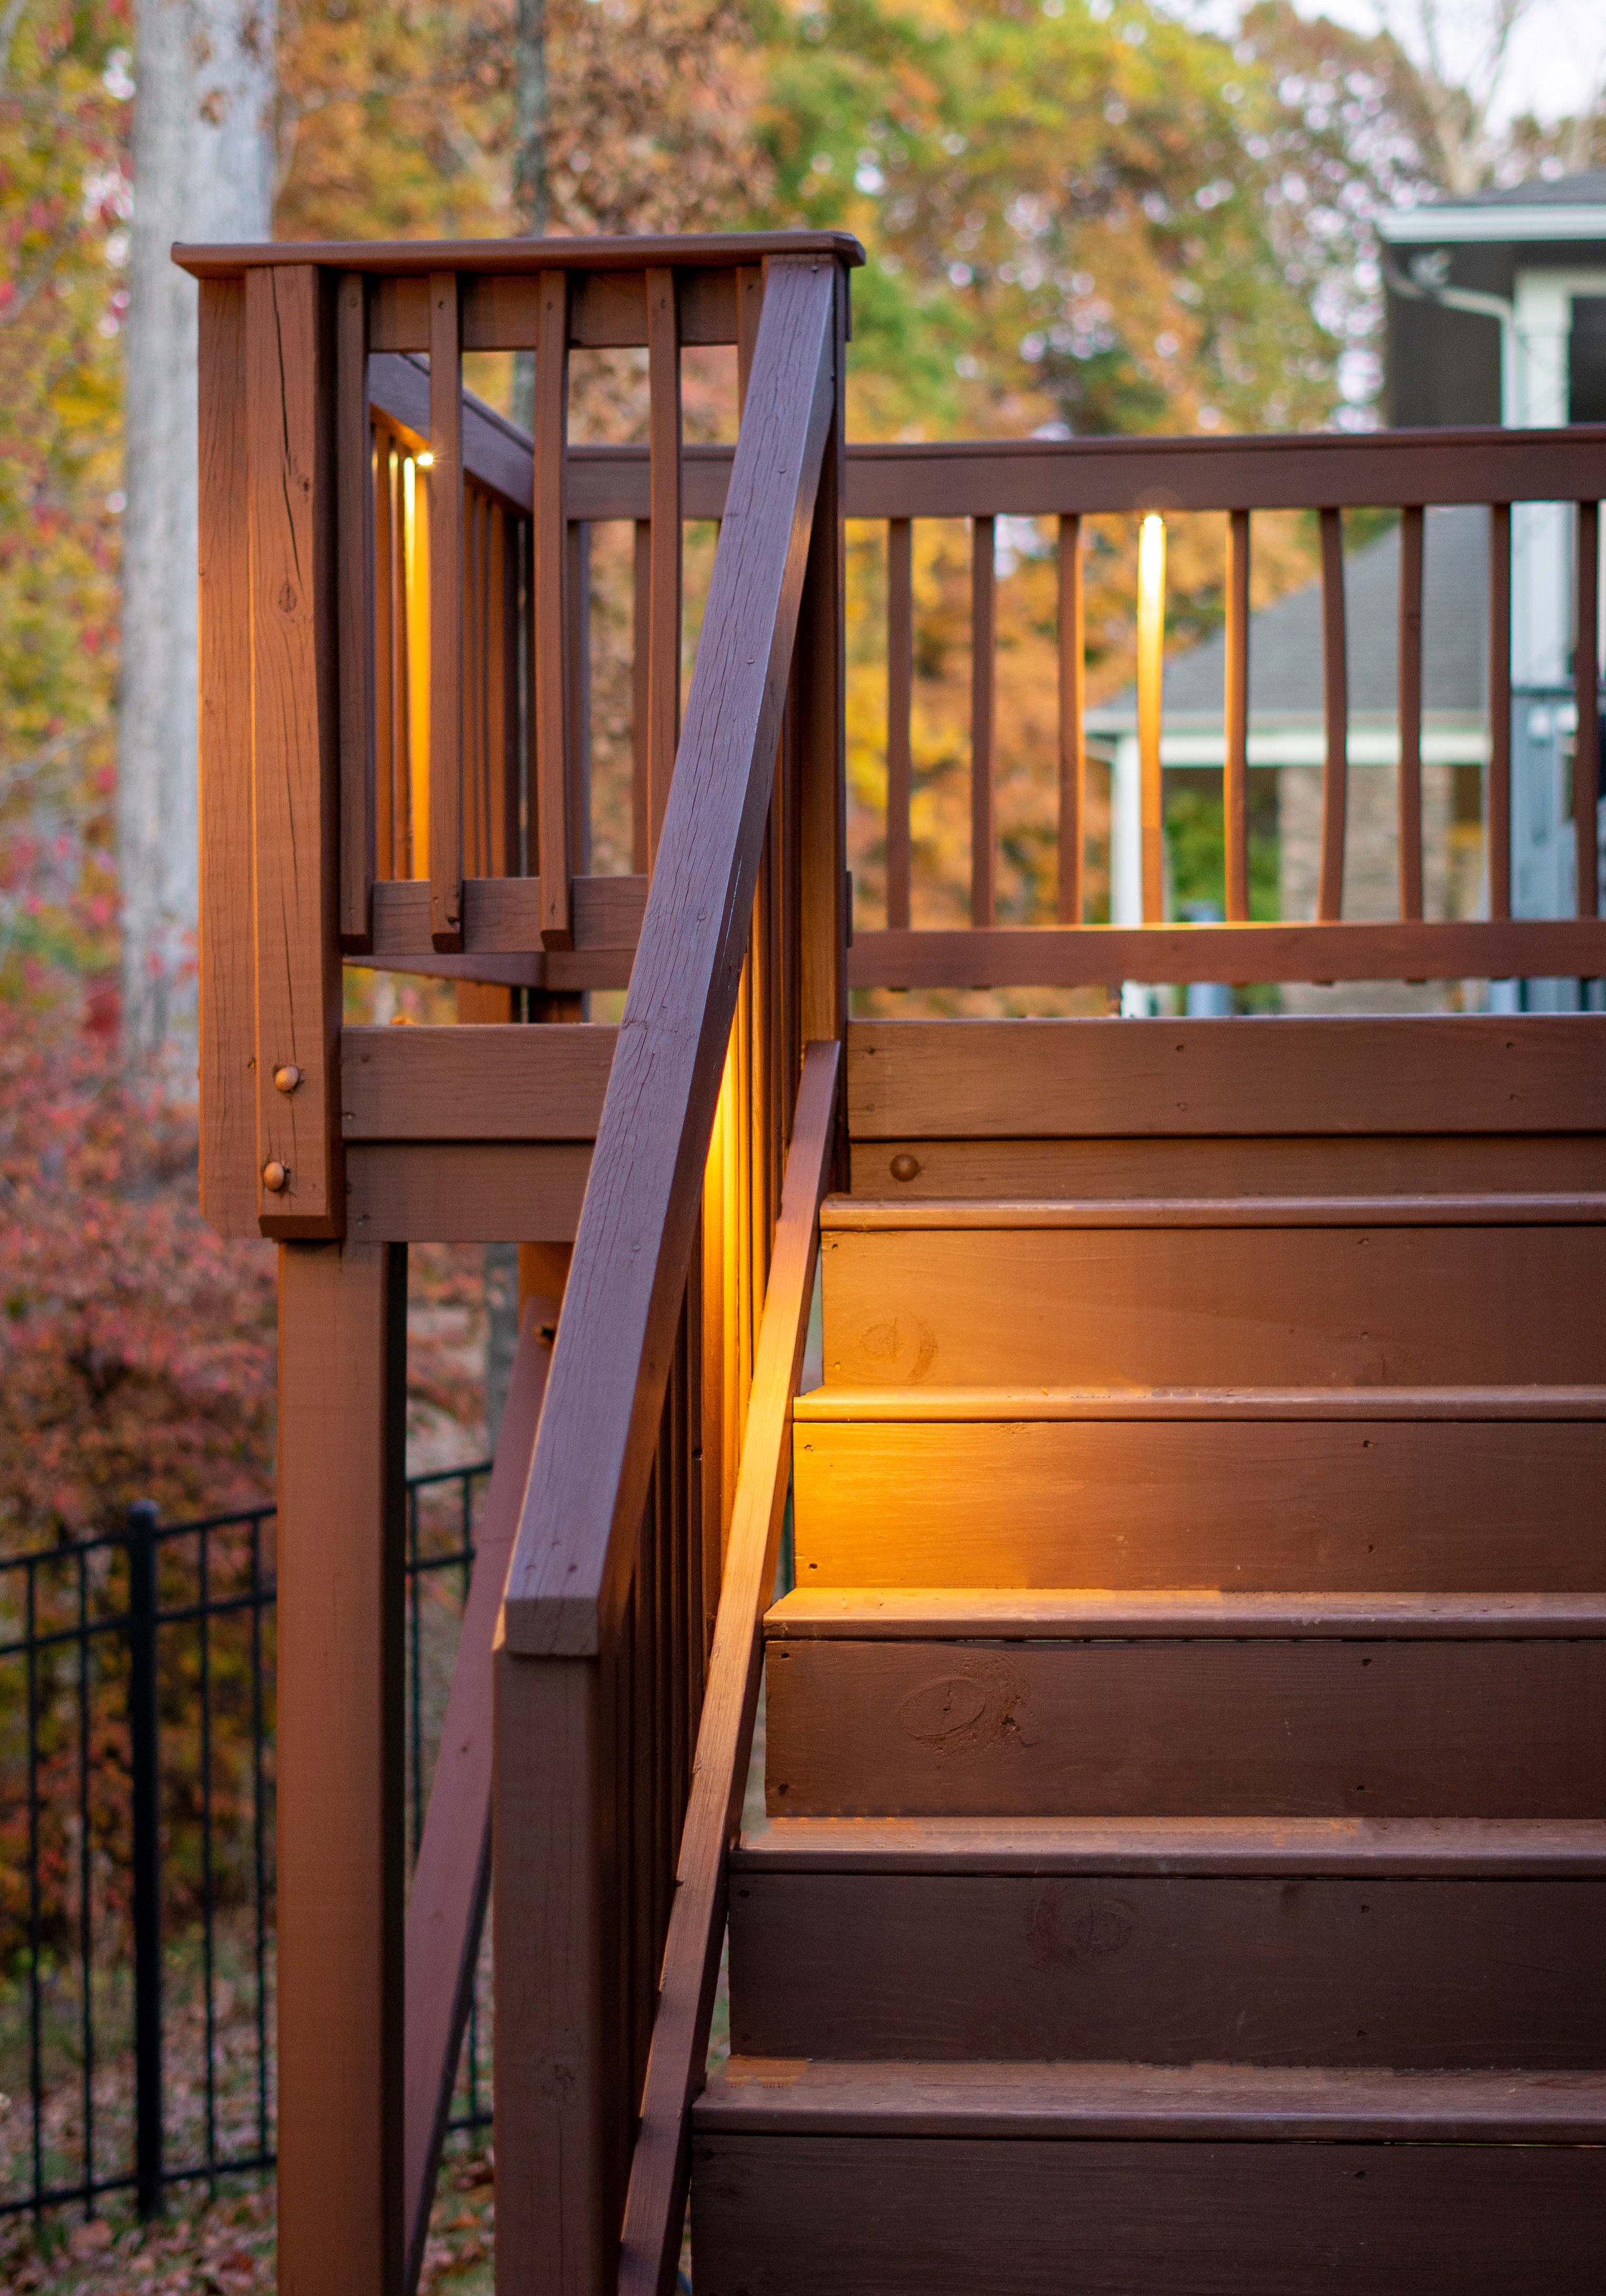  Deck lighting on a brown deck with stairs.  